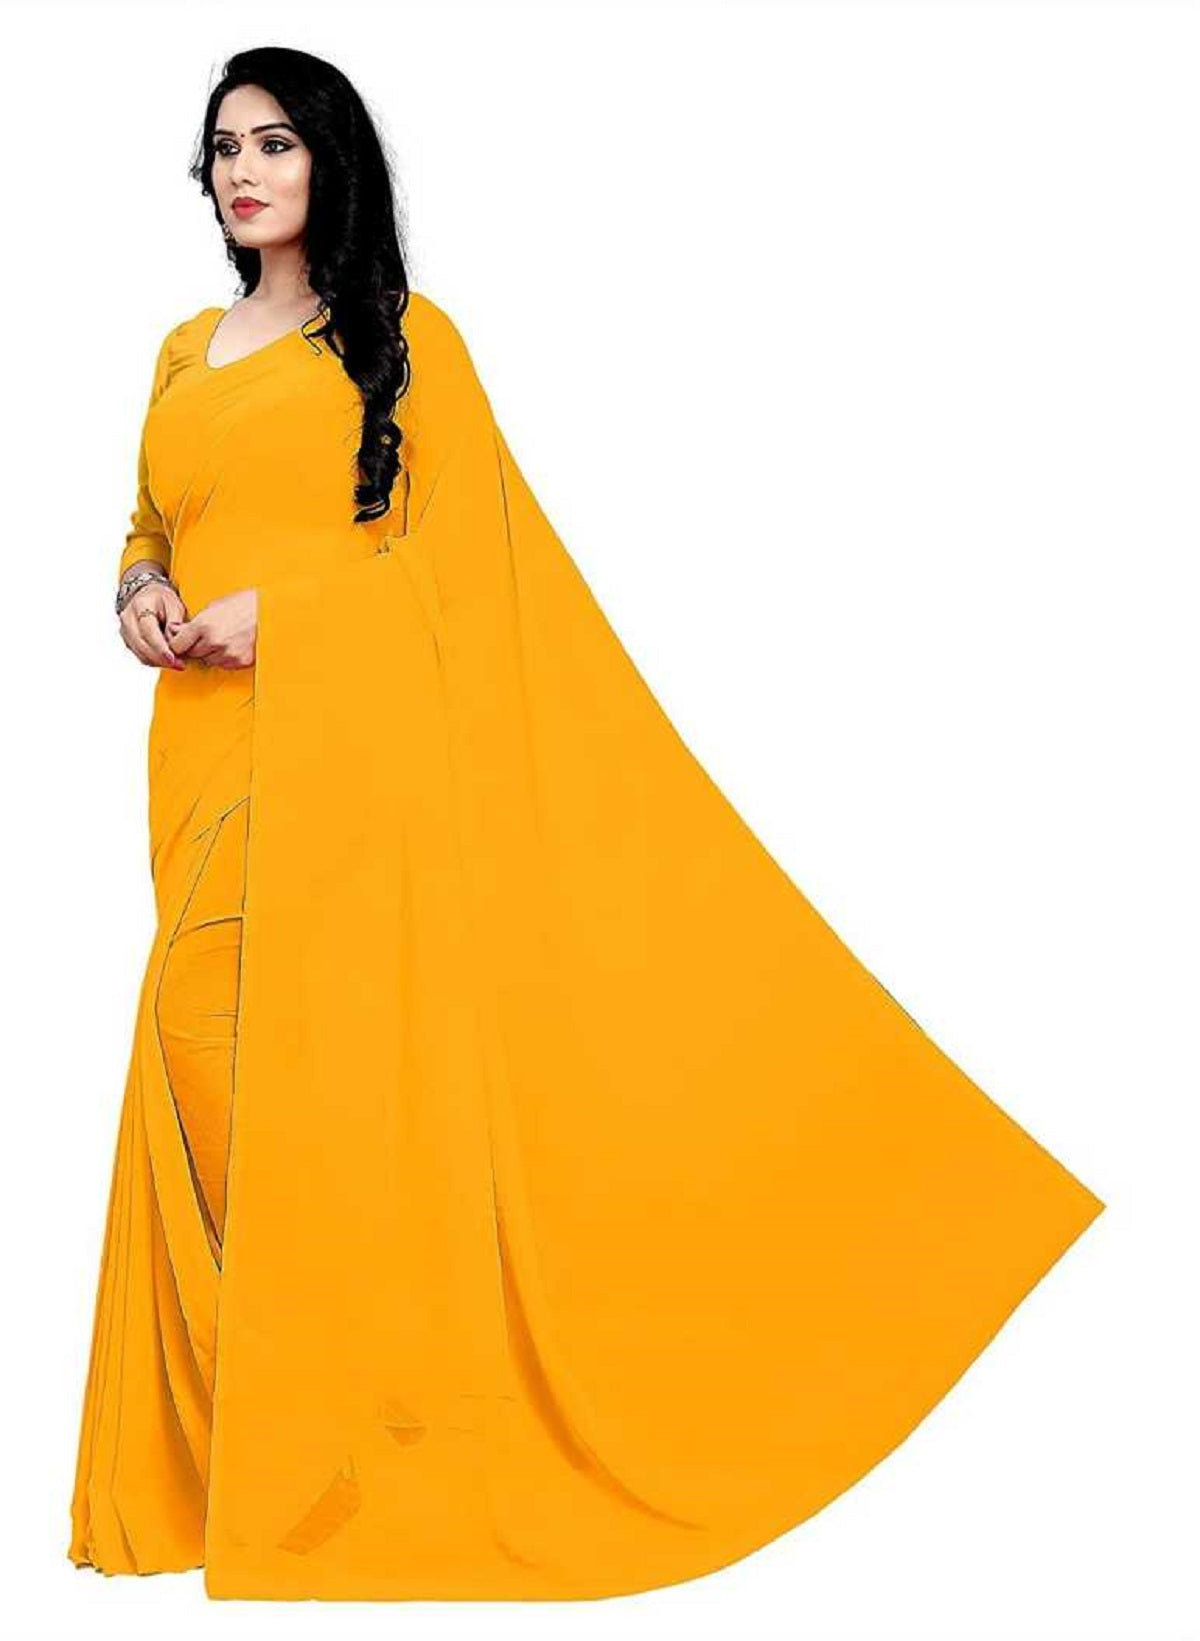 Women's Plain Woven Daily Wear  Formal Georgette Sari With Blouse Piece (Orange) - NIMIDHYA